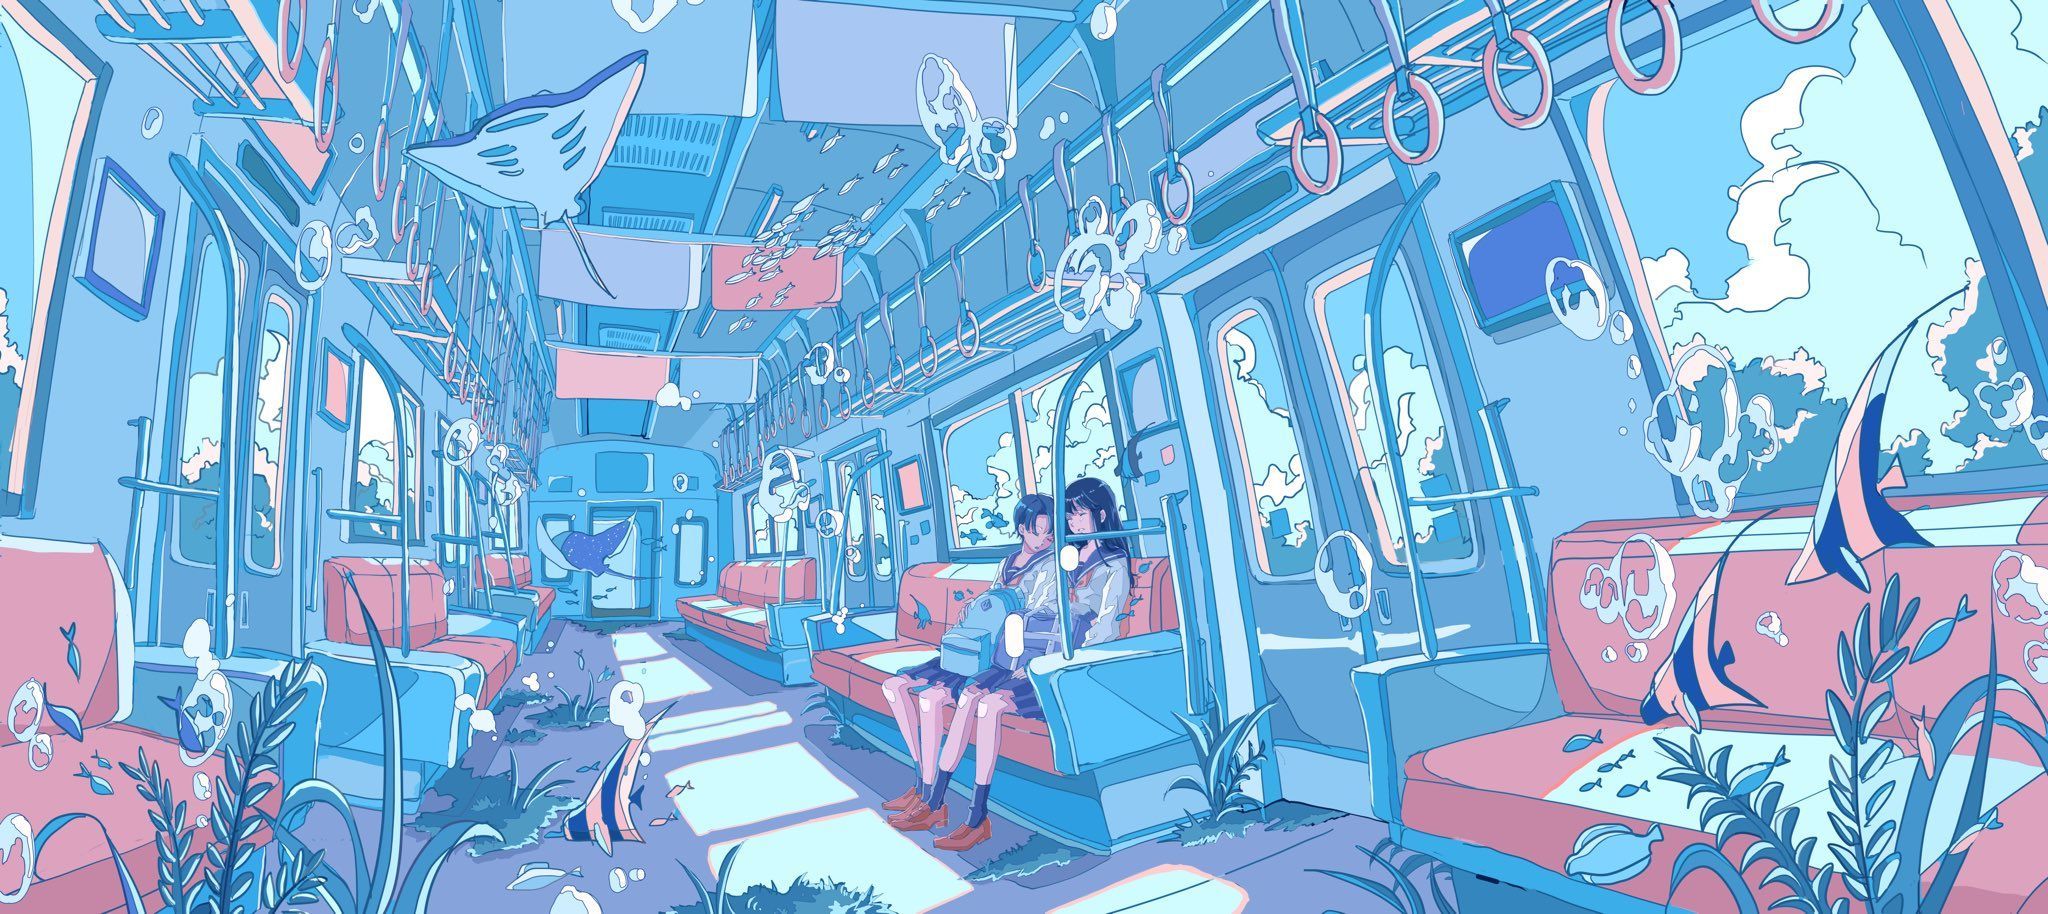 A woman sitting on the train with her headphones - Blue anime